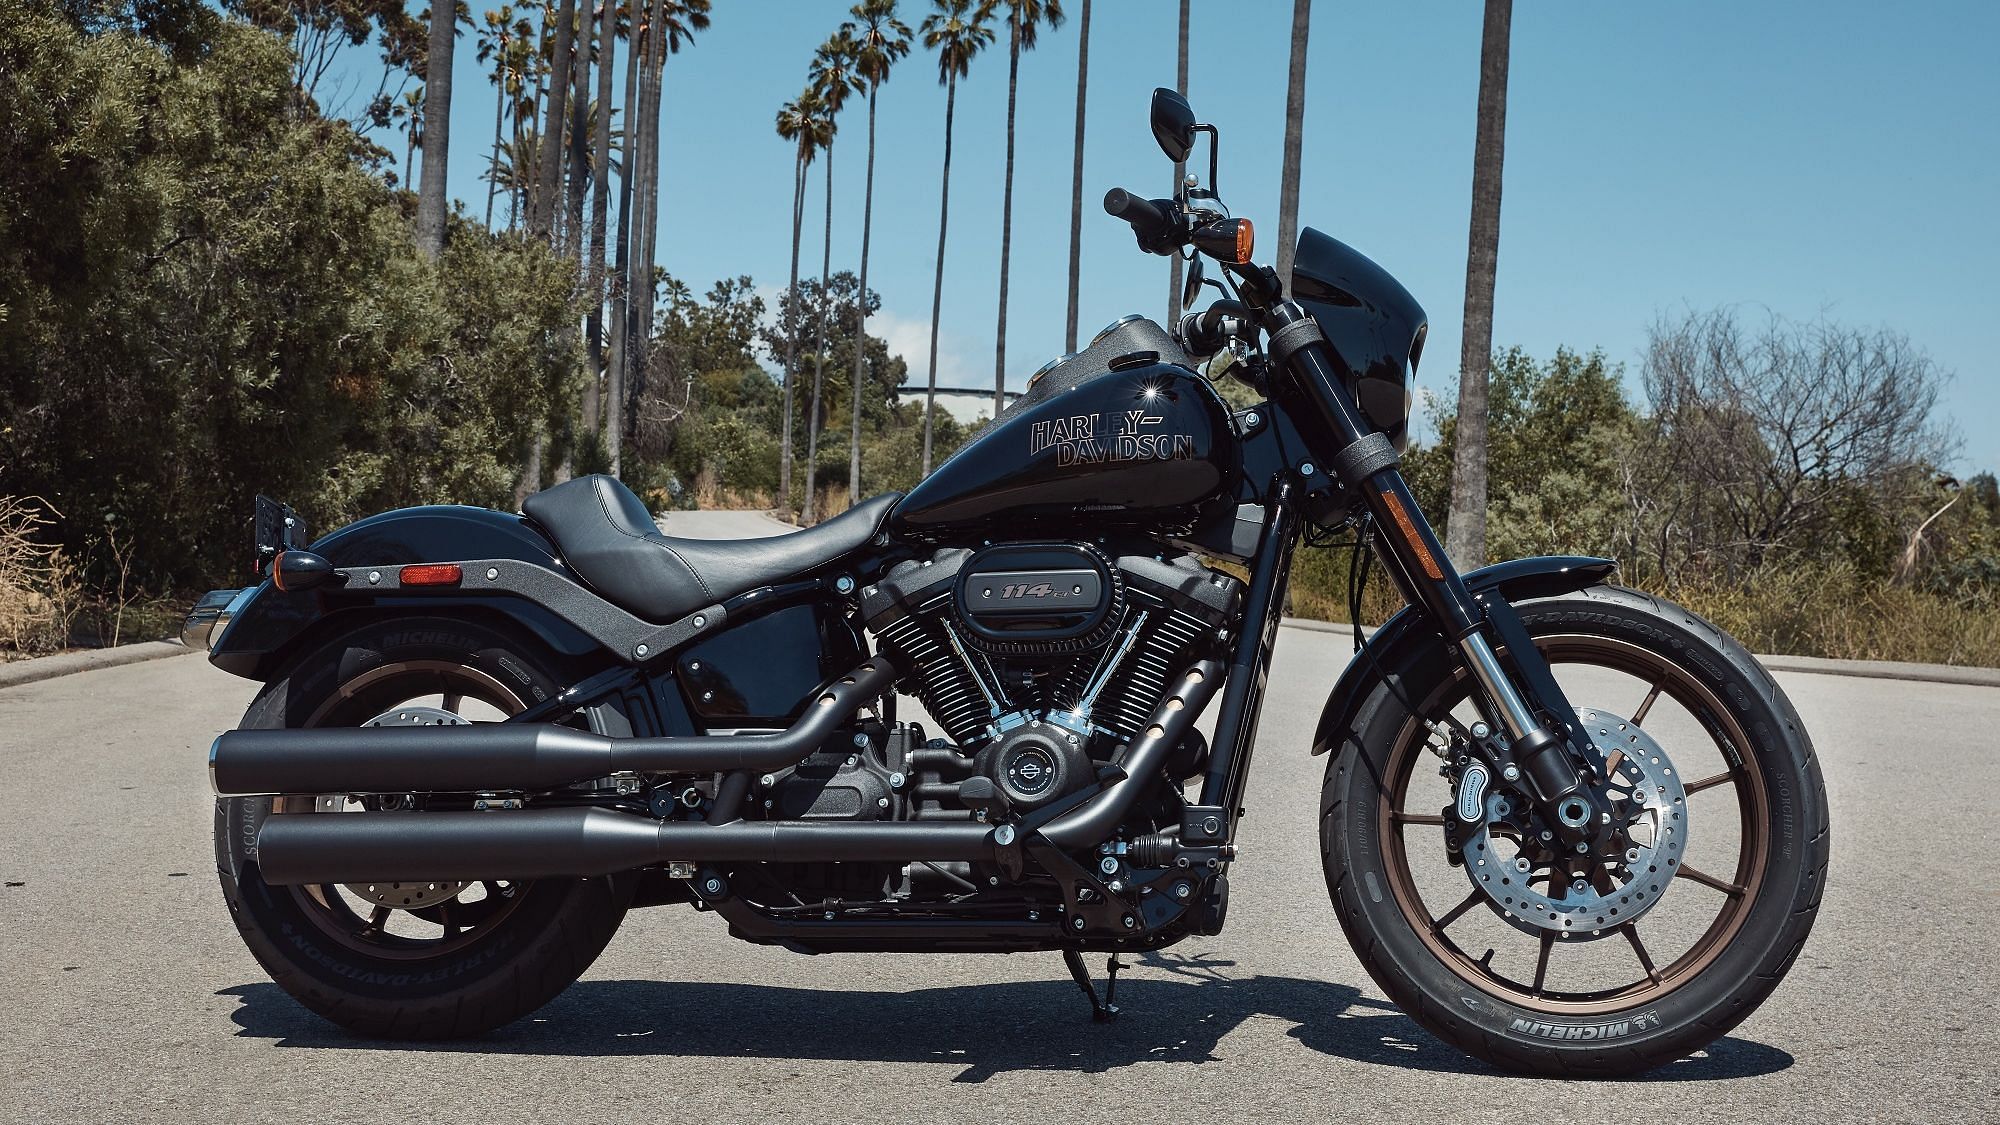 2020 HarleyDavidson Low Rider S India Launch, Price and Specifications